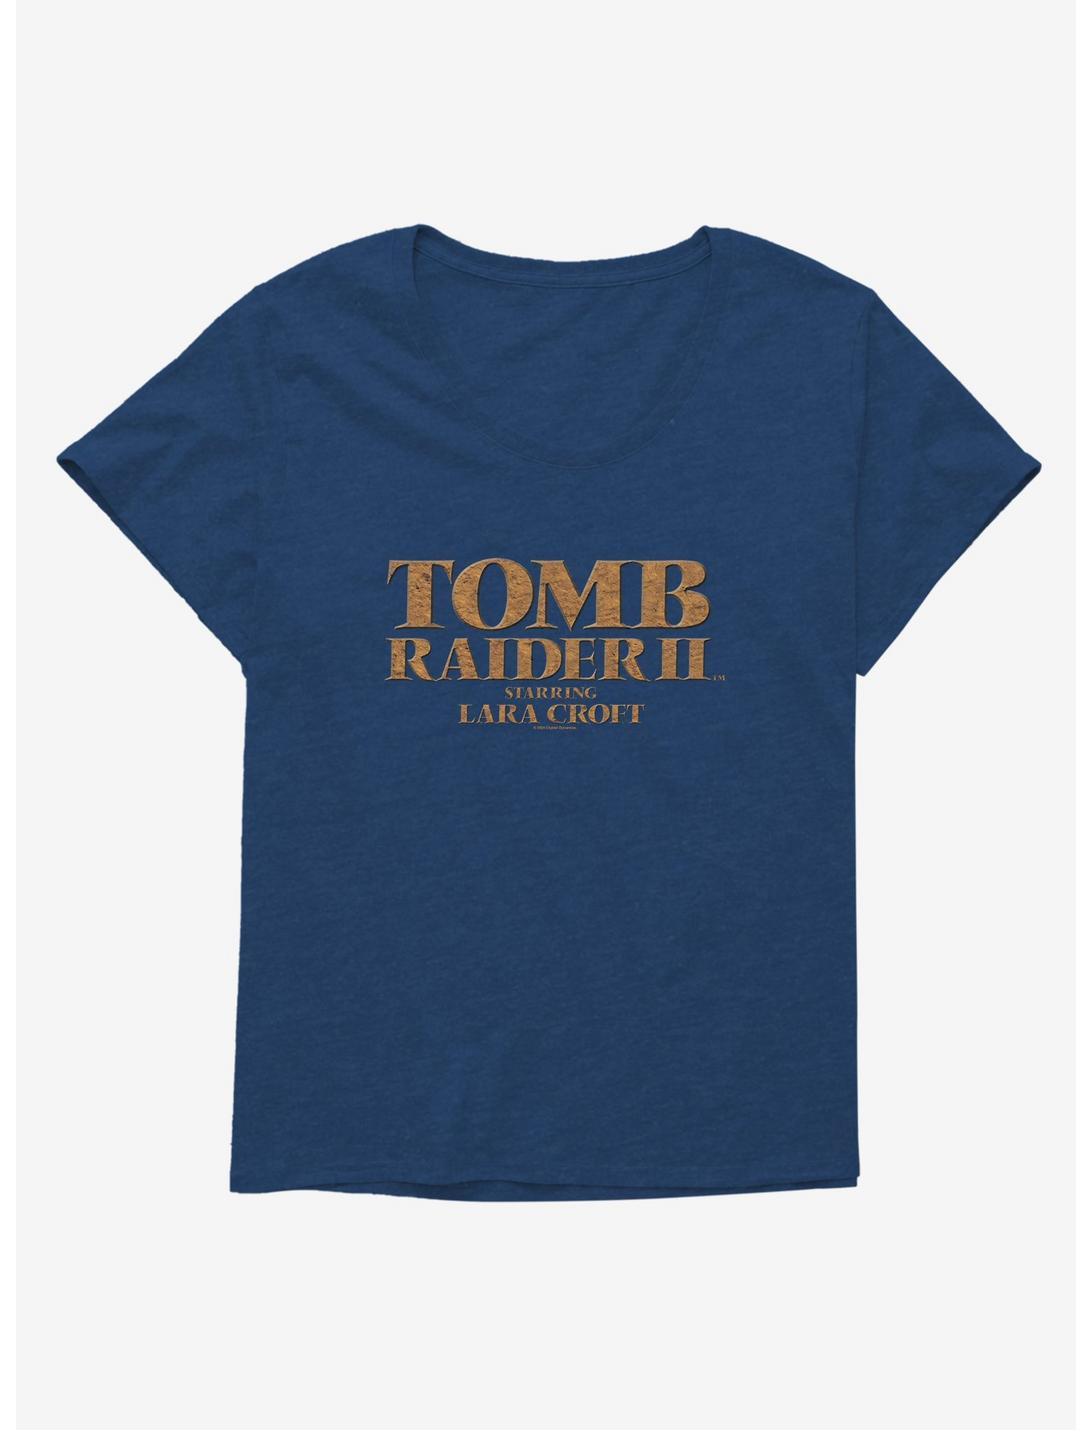 Tomb Raider III Game Cover Girls T-Shirt Plus Size, , hi-res